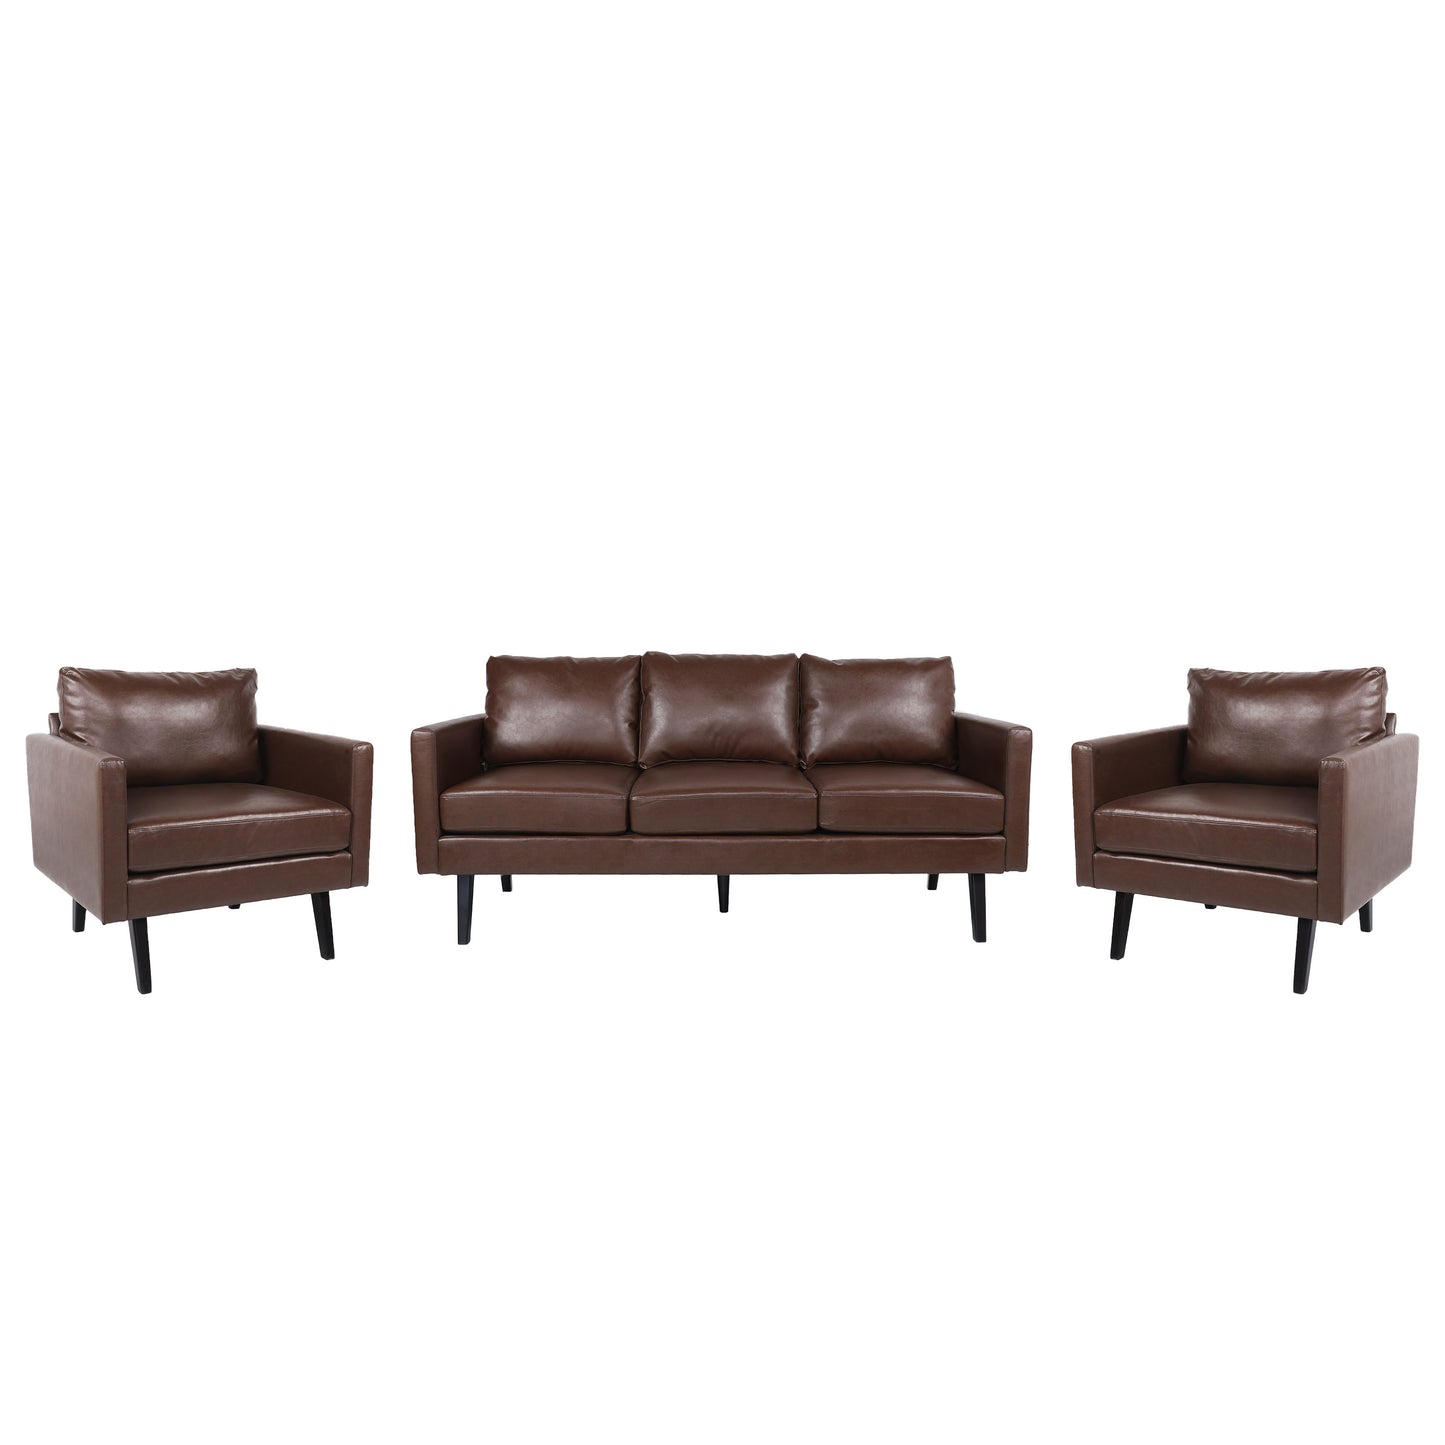 Dowd Mid Century Modern Faux Leather 3 Piece Living Room Sofa Set